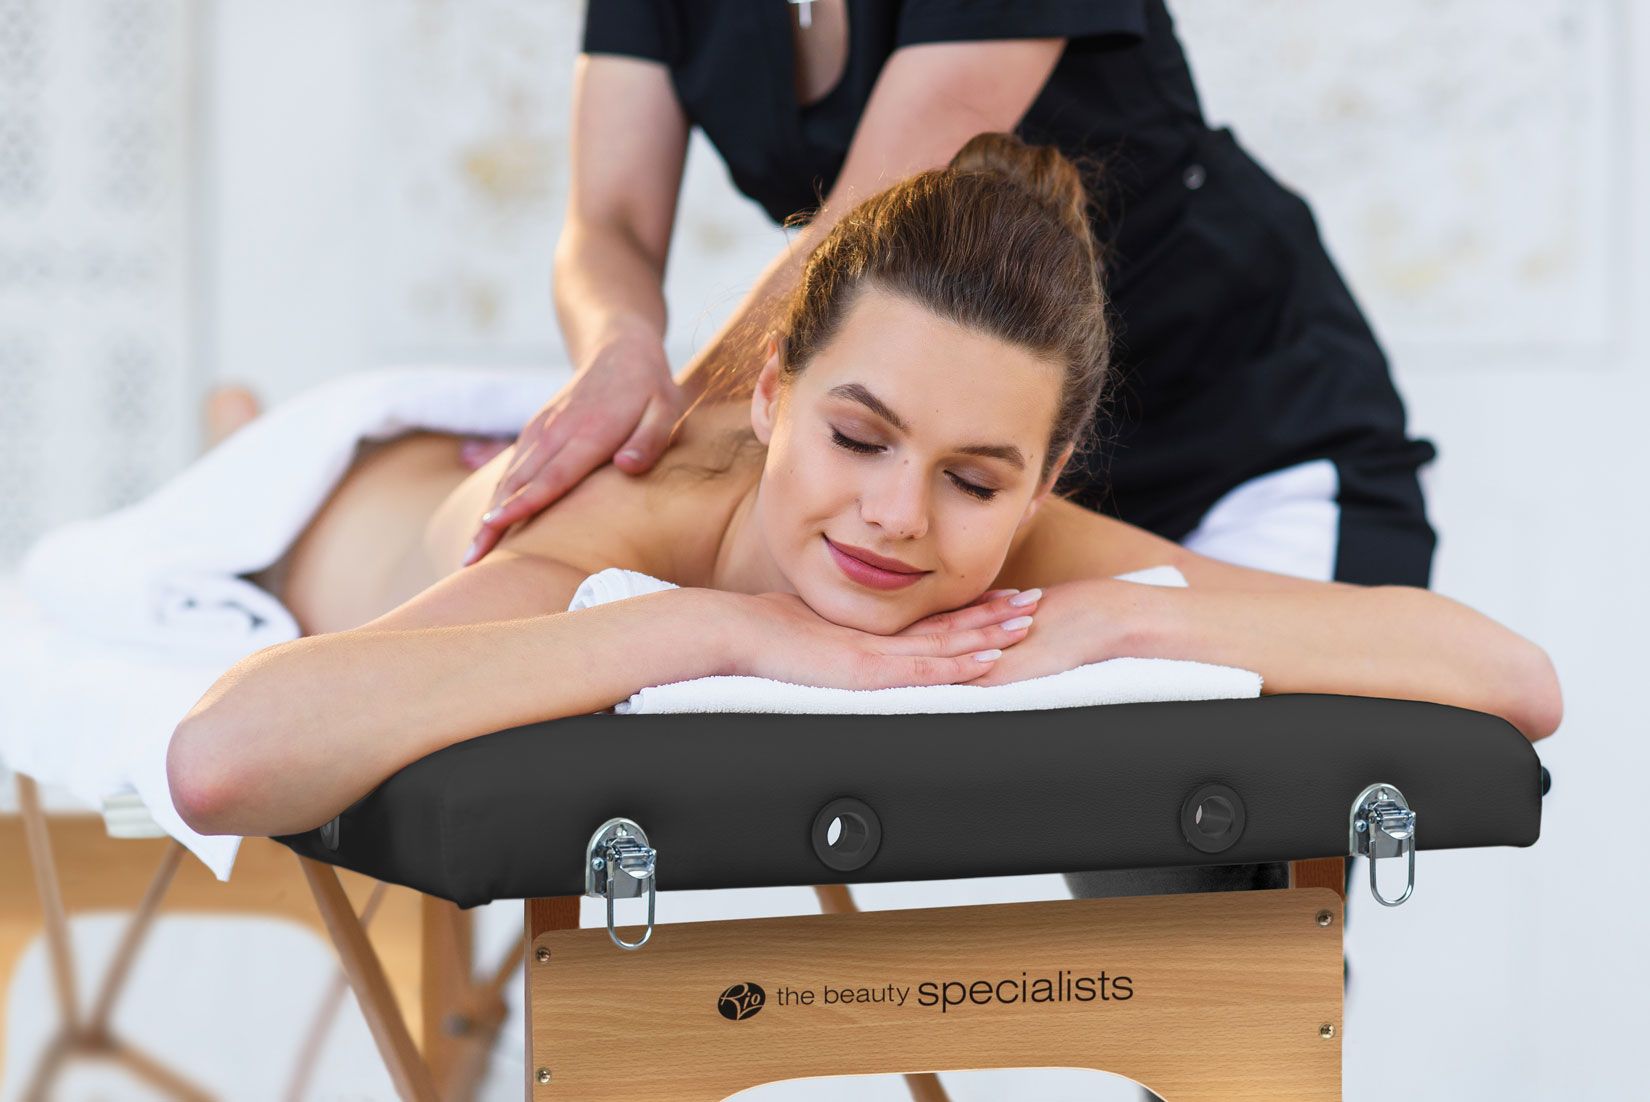 Women receiving massage on the Rio massage table in a professional setting